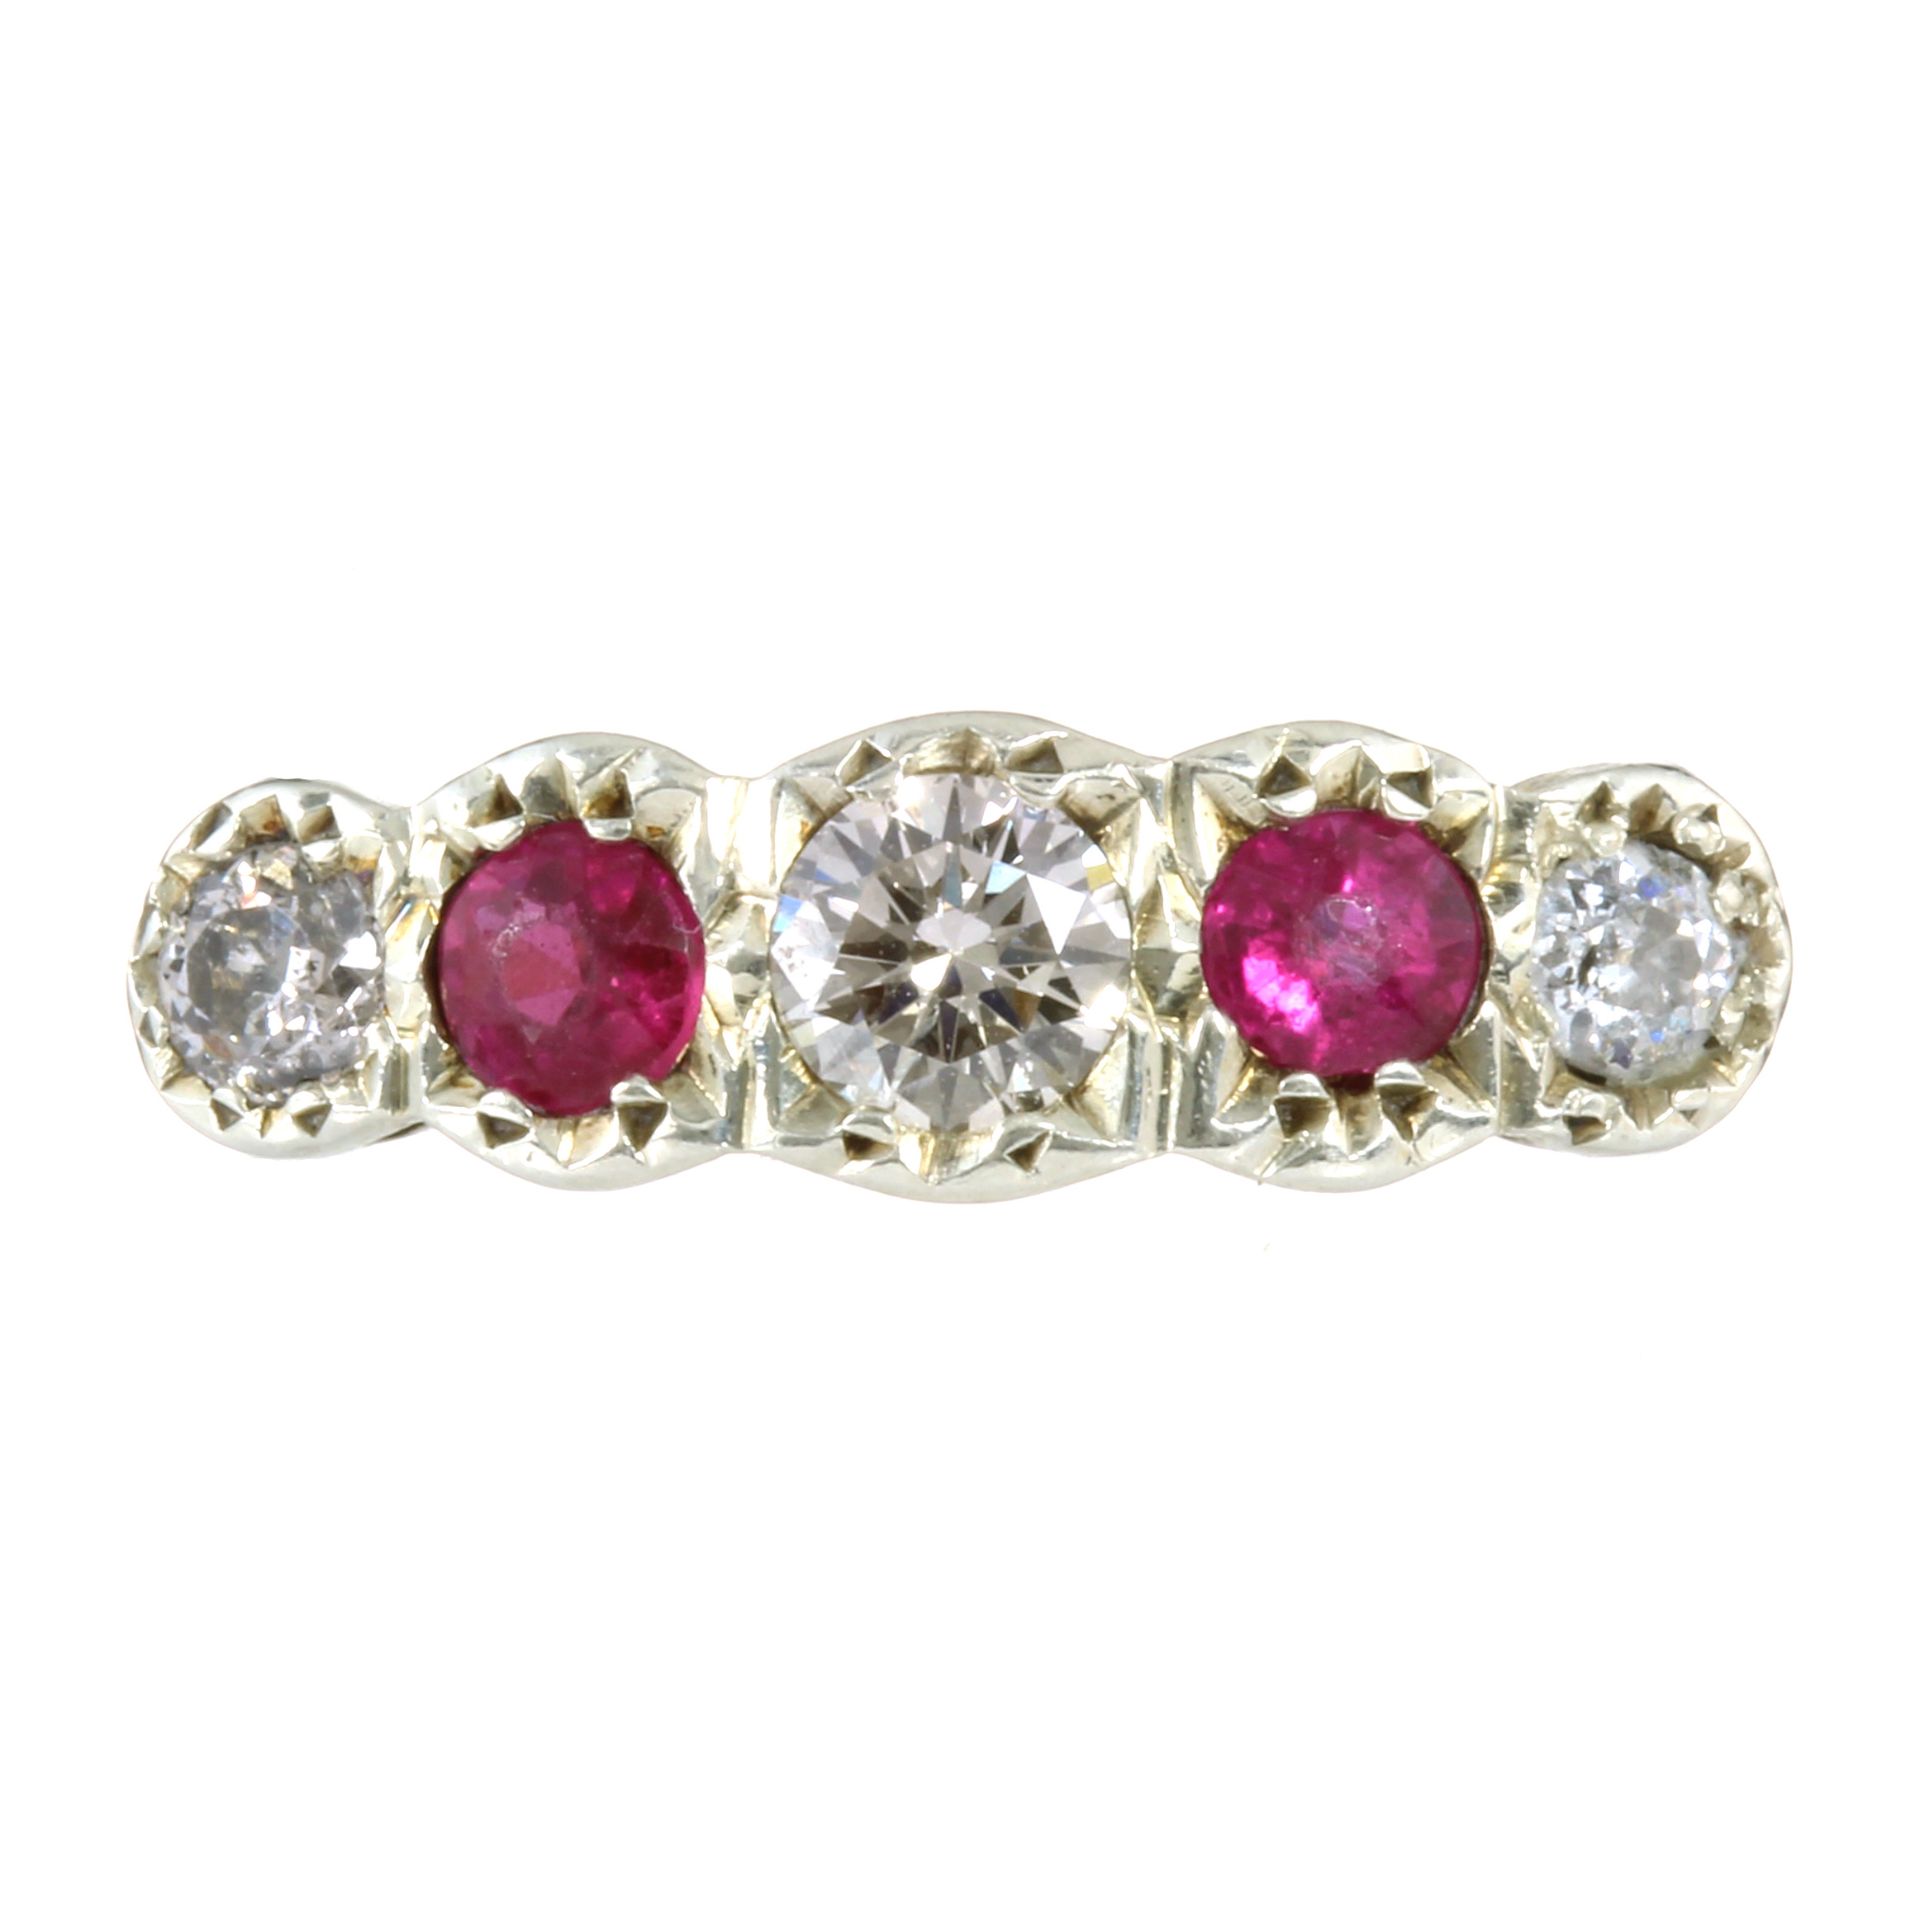 AN DIAMOND AND RUBY FIVE STONE RING in yellow gold set with five alternating, graduated round cut